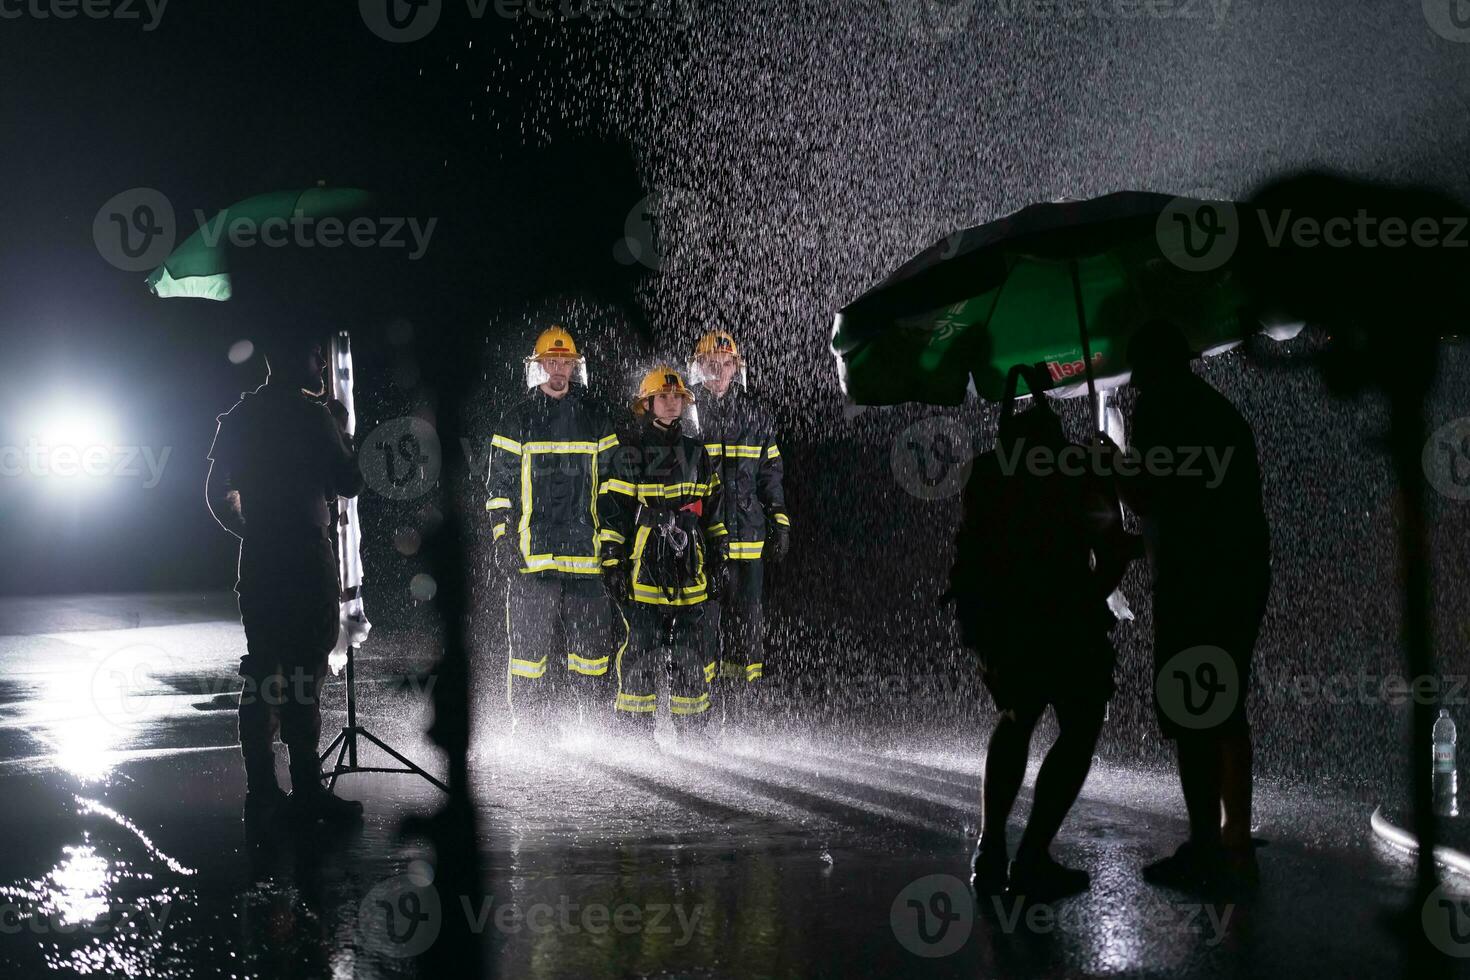 Behind the scene of Firefighters photo and cinema set with rain use a water hose to eliminate a fire hazard.